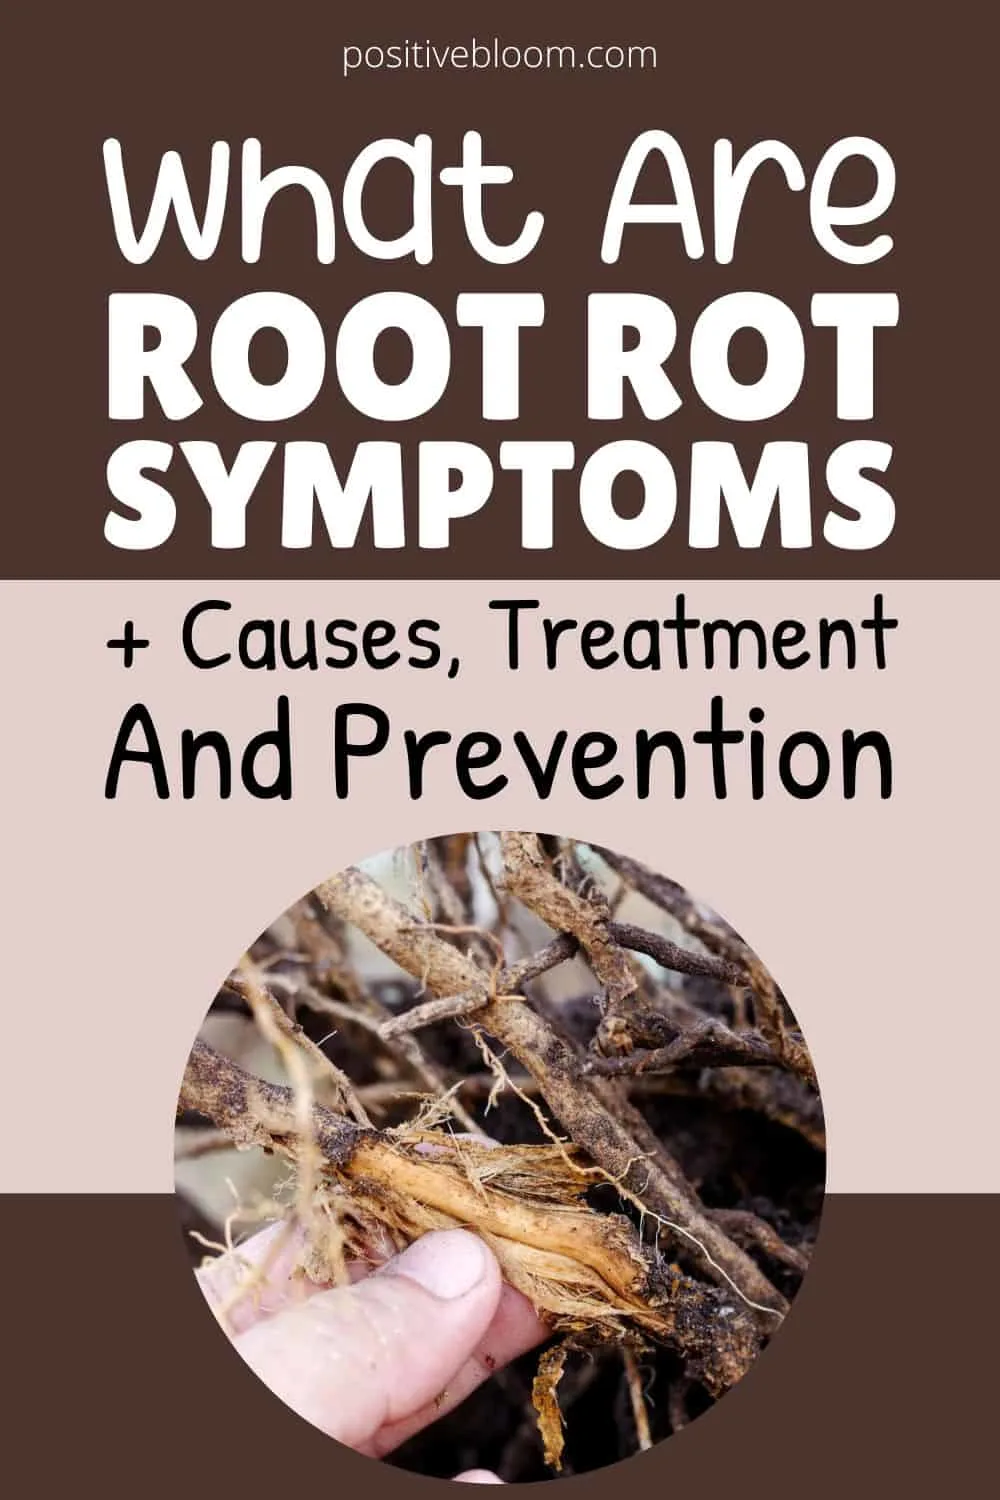 What Are Root Rot Symptoms + Causes, Treatment & Prevention Pinterest